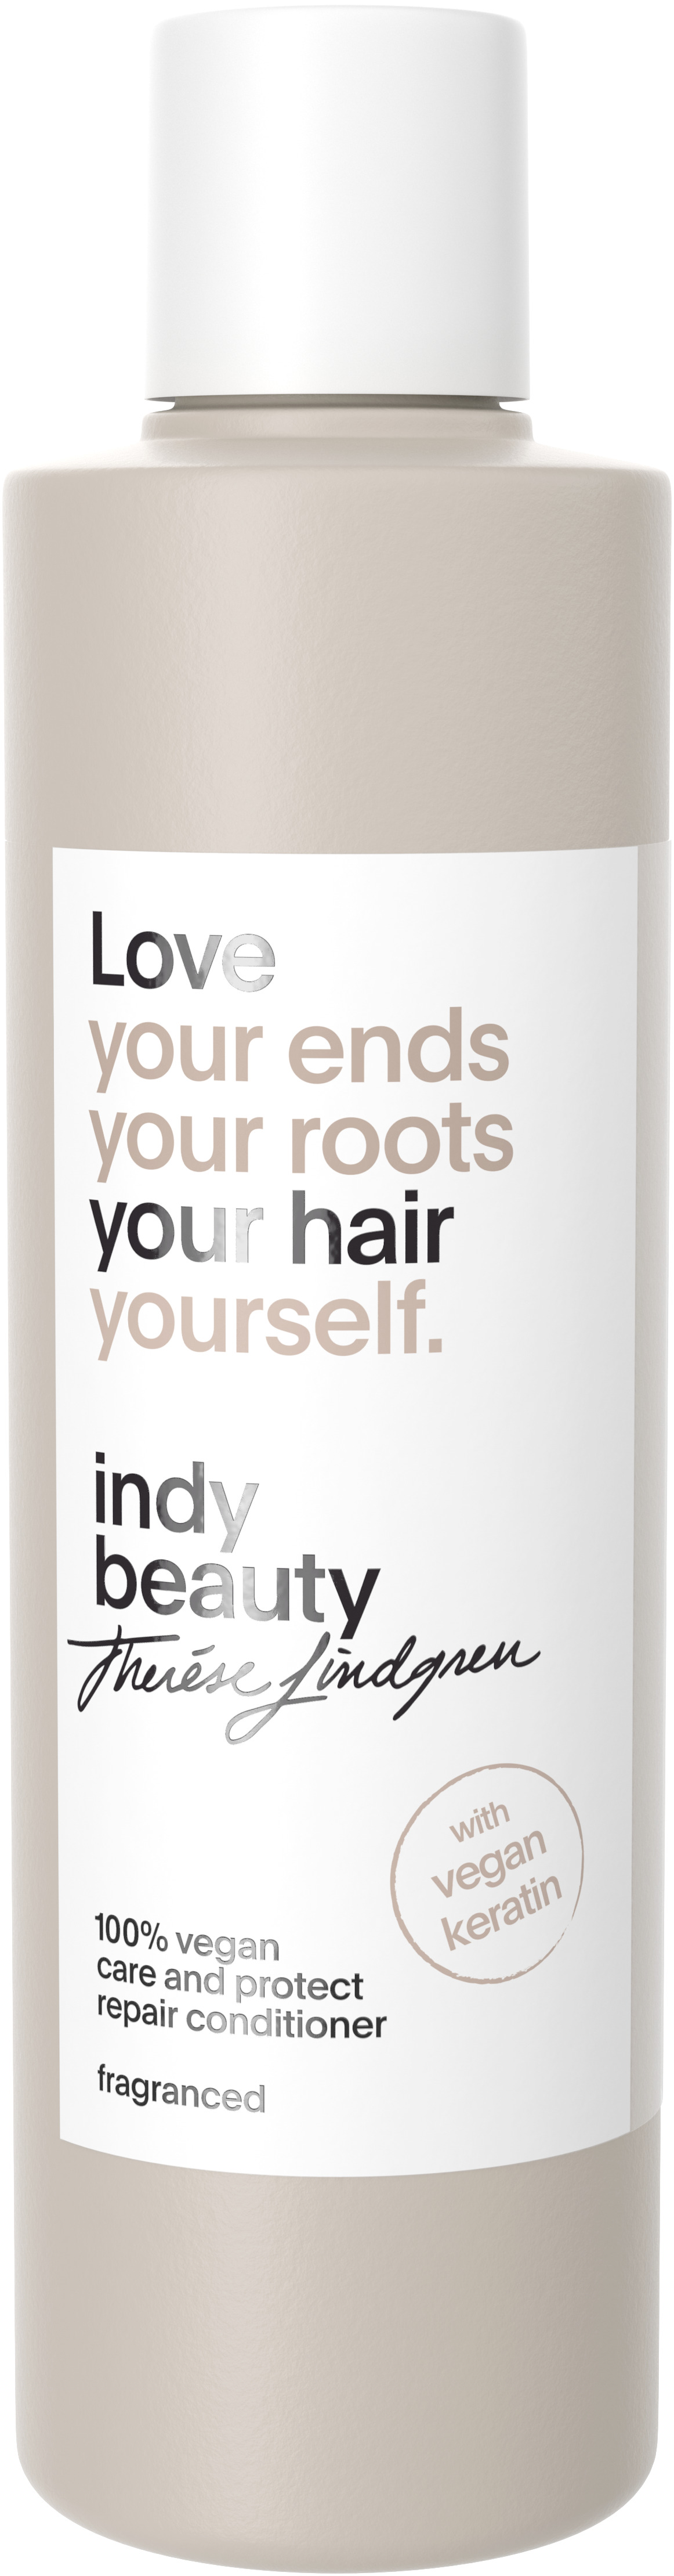 Indy Beauty Care And Protect Repair Conditioner 250ml